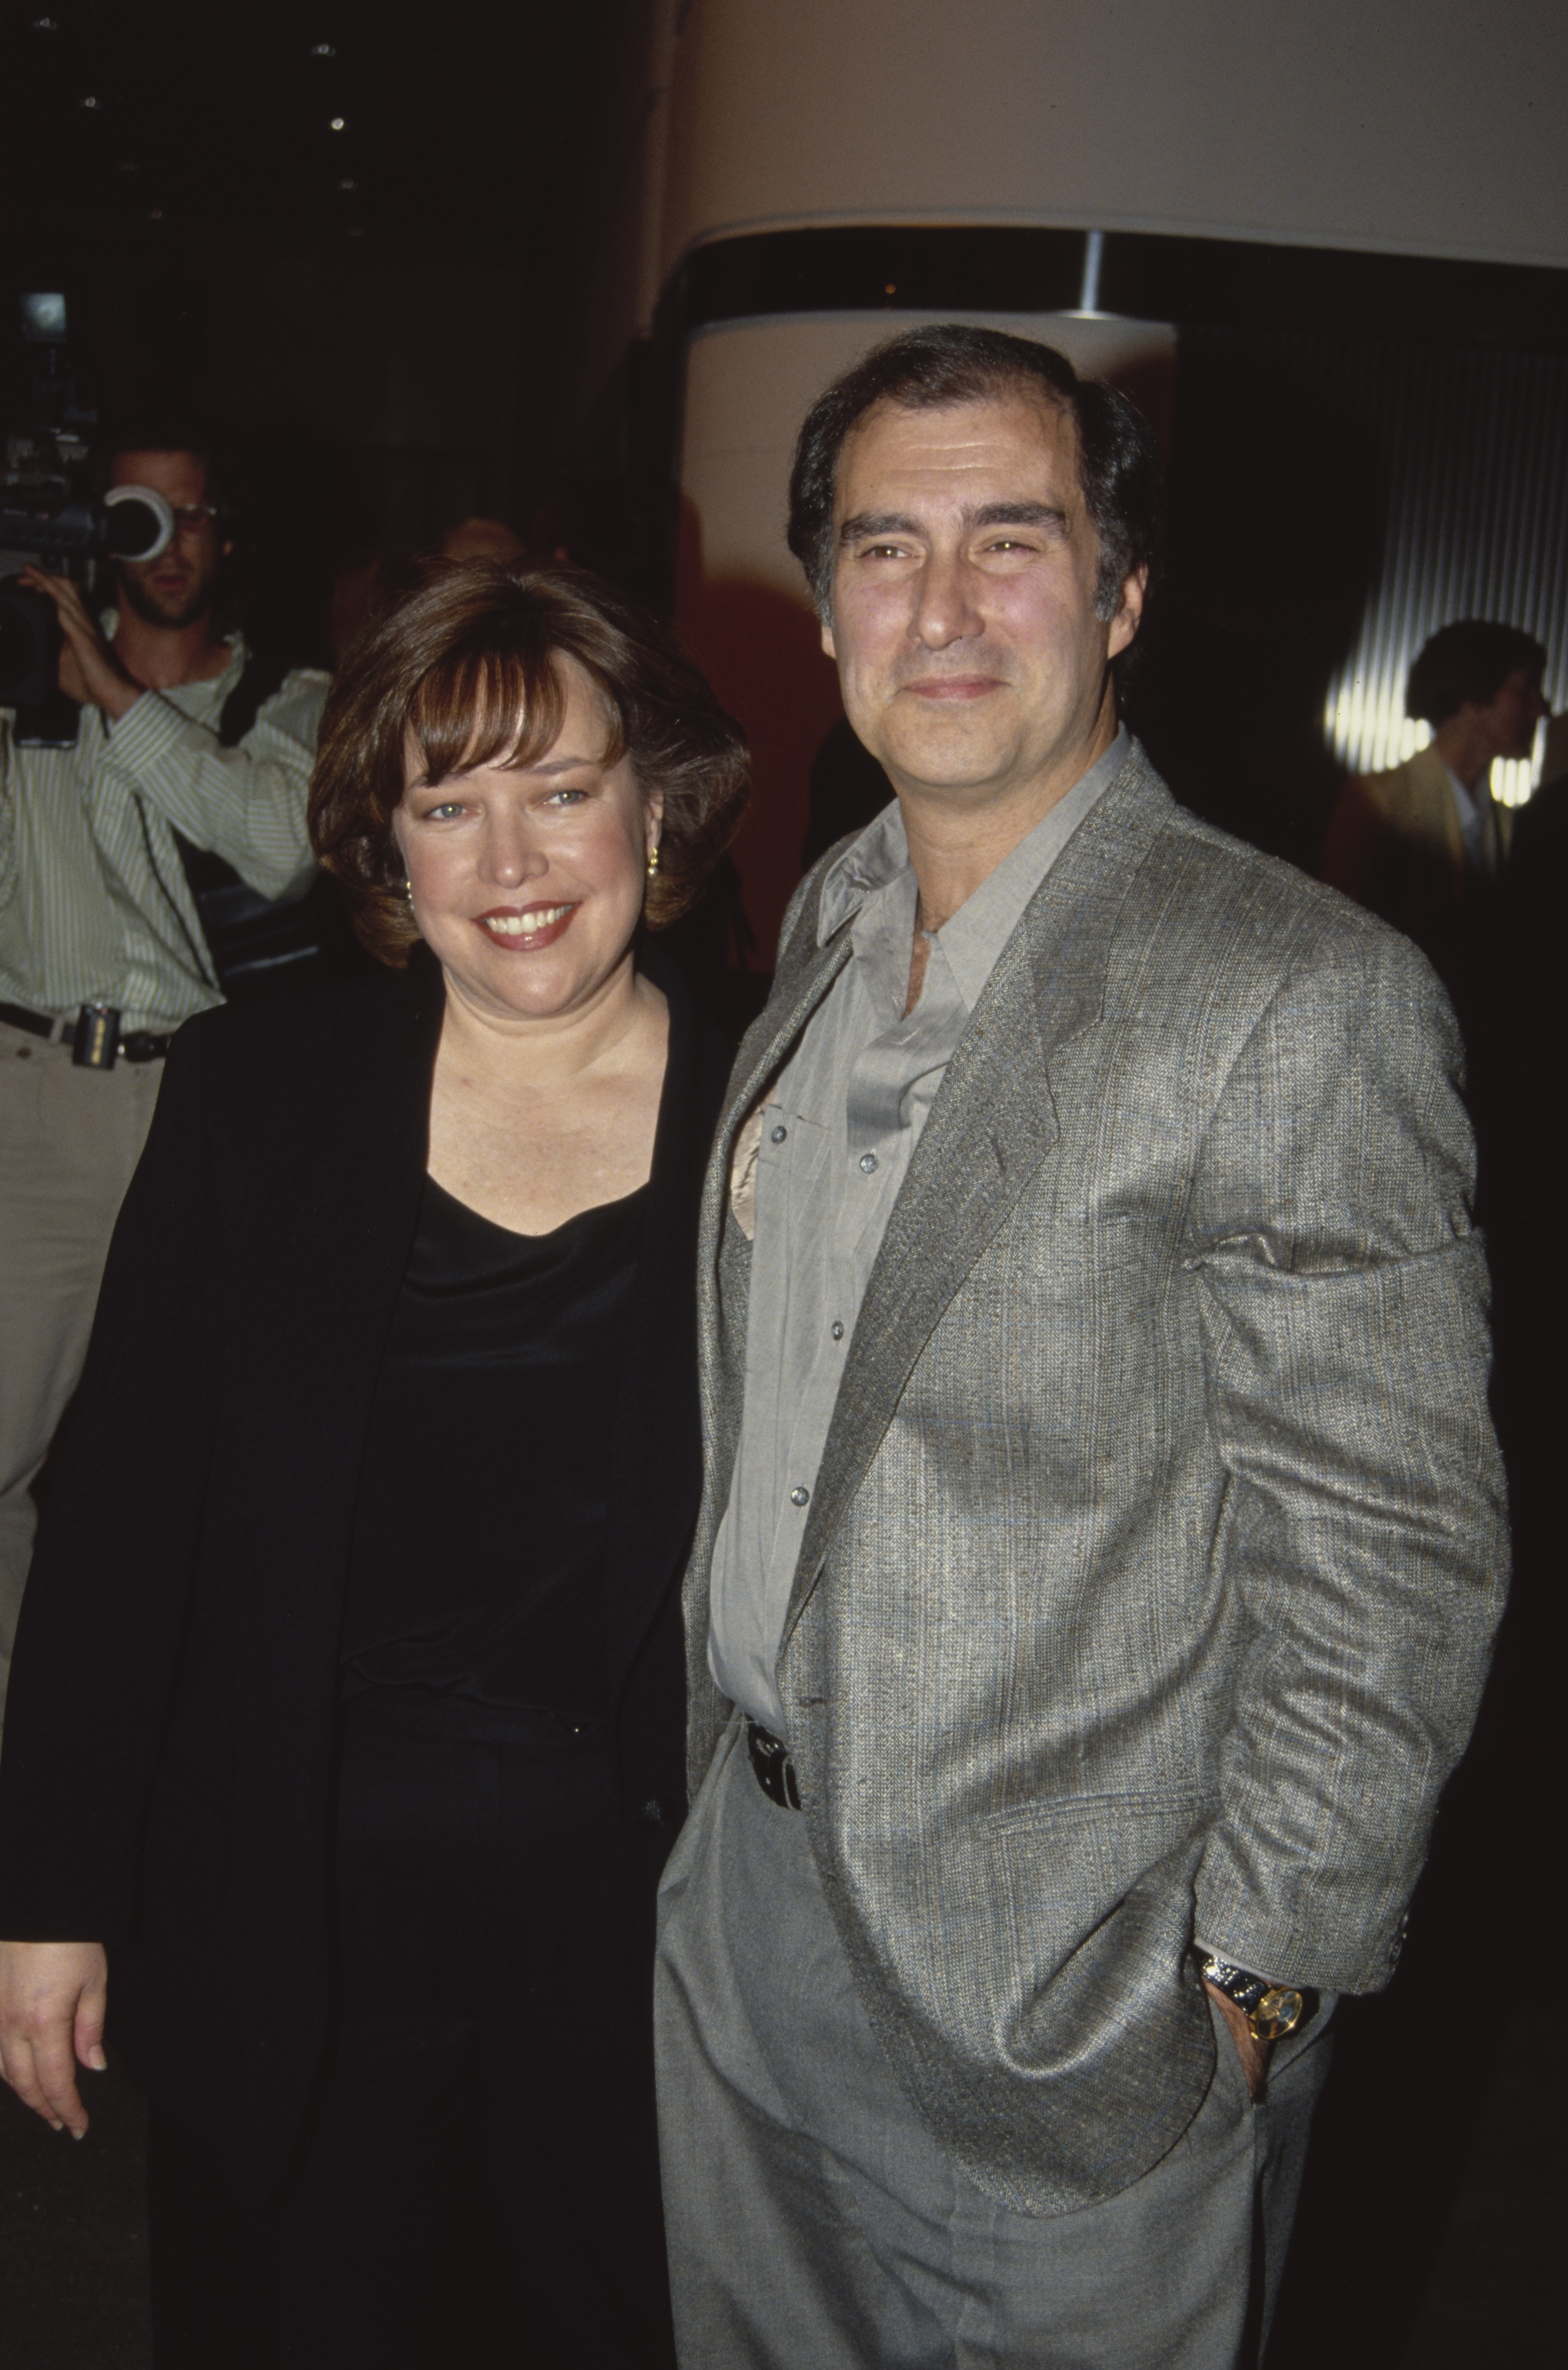 American actress Kathy Bates and her husband, American actor Tony Campisi, attend the screening of "A Home Of Our Own" held in aid of homeless charities, at Sony Studios in Culver City, California, on November 2, 1993. | Source: Getty Images